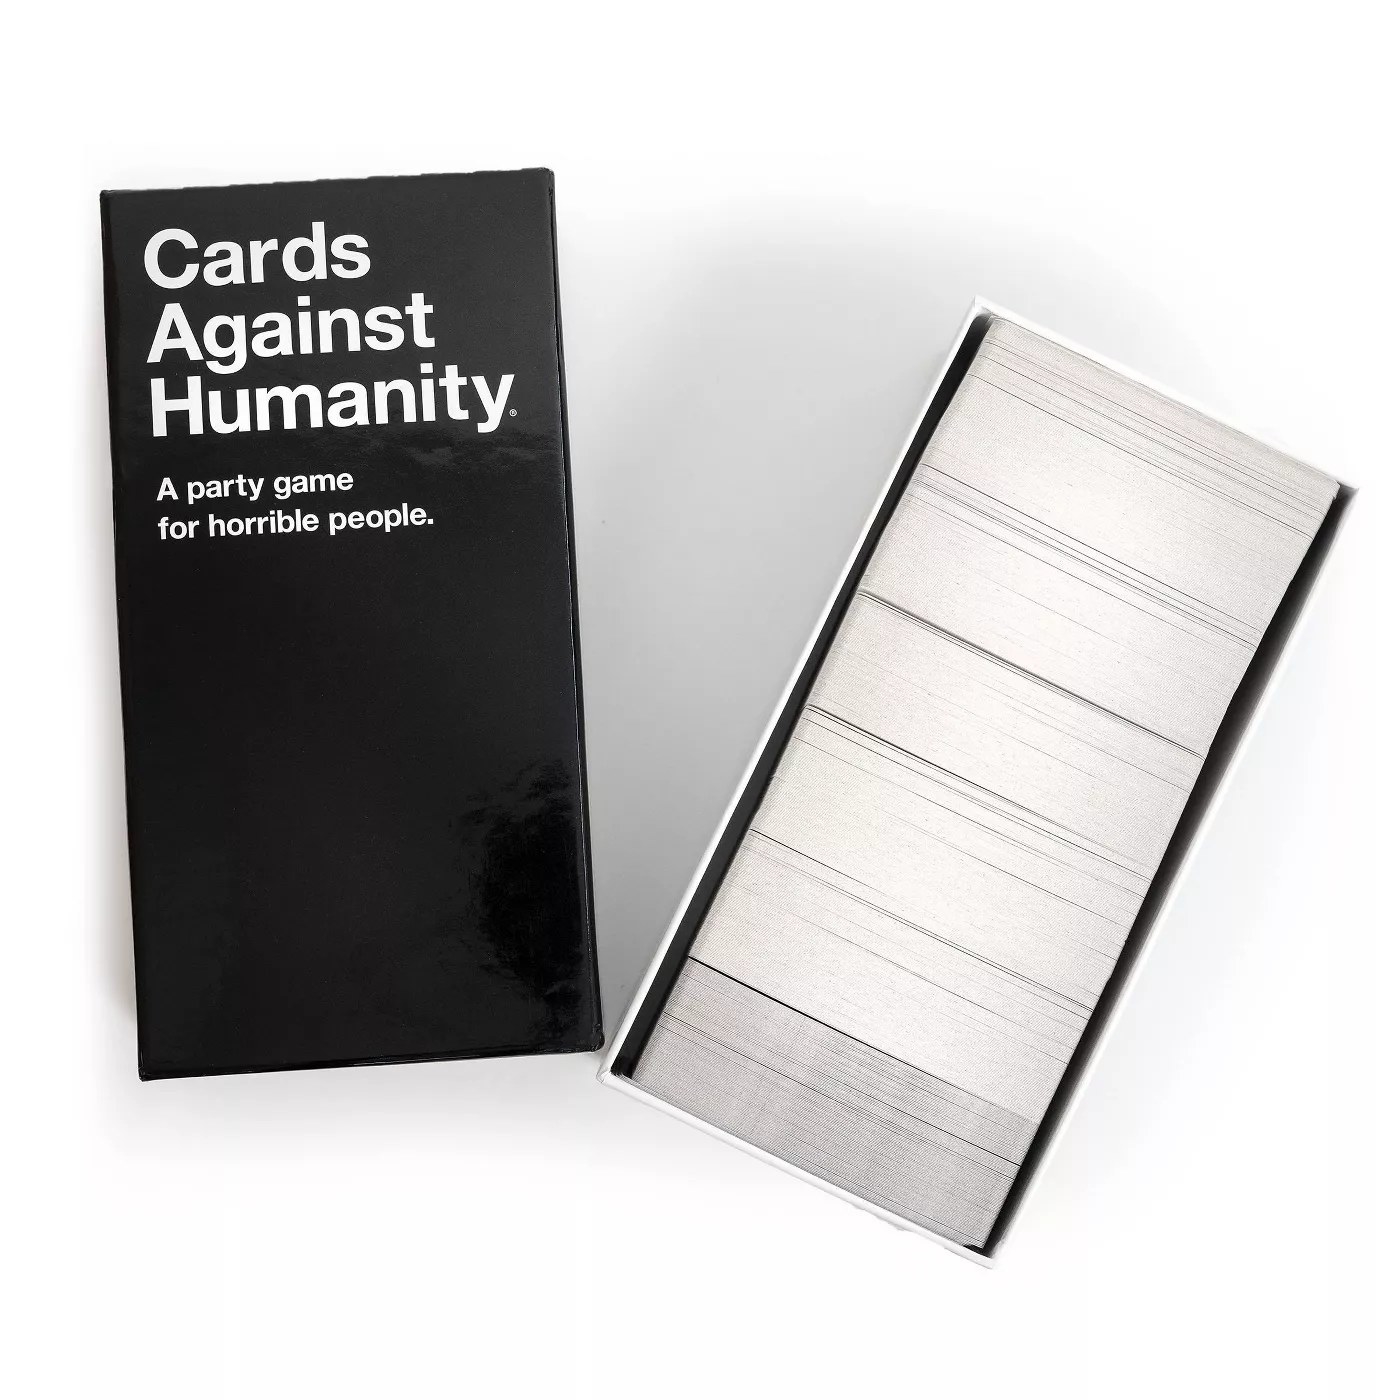 Cards Against Humanity: A party game for horrible people